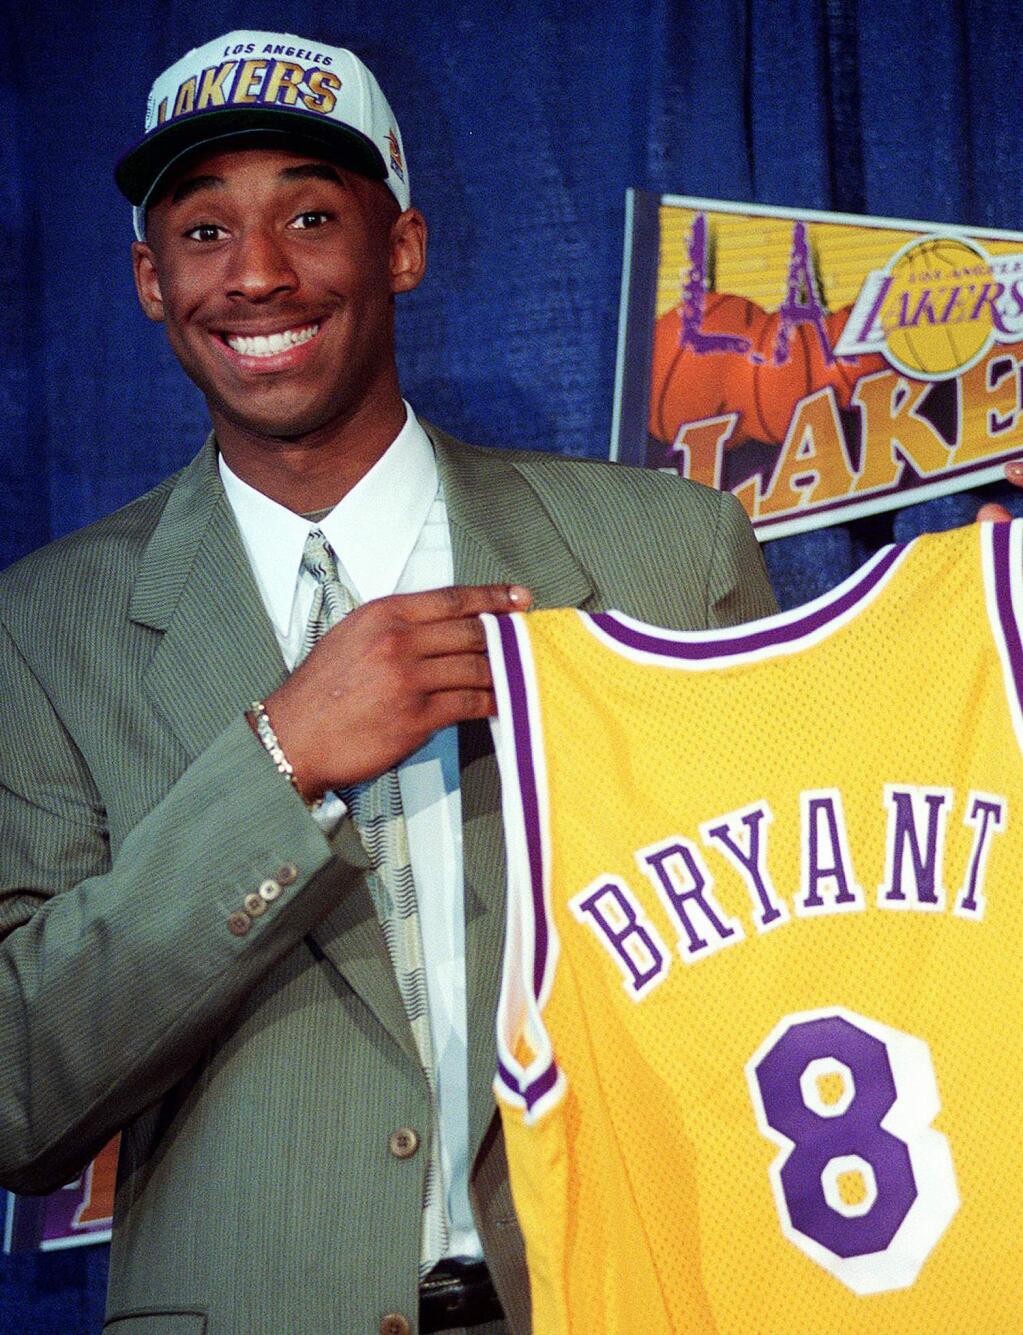 FILE - In this July 12, 1996, file photo Kobe Bryant, 17, jokes with the media as he holds his Los Angeles Lakers jersey during a news conference at the Great Western Forum in Inglewood, Calif. Bryant, a five-time NBA champion and a two-time Olympic gold medalist, died in a helicopter crash in California on Sunday, Jan. 26, 2020. (AP Photo/Susan Sterner, File)